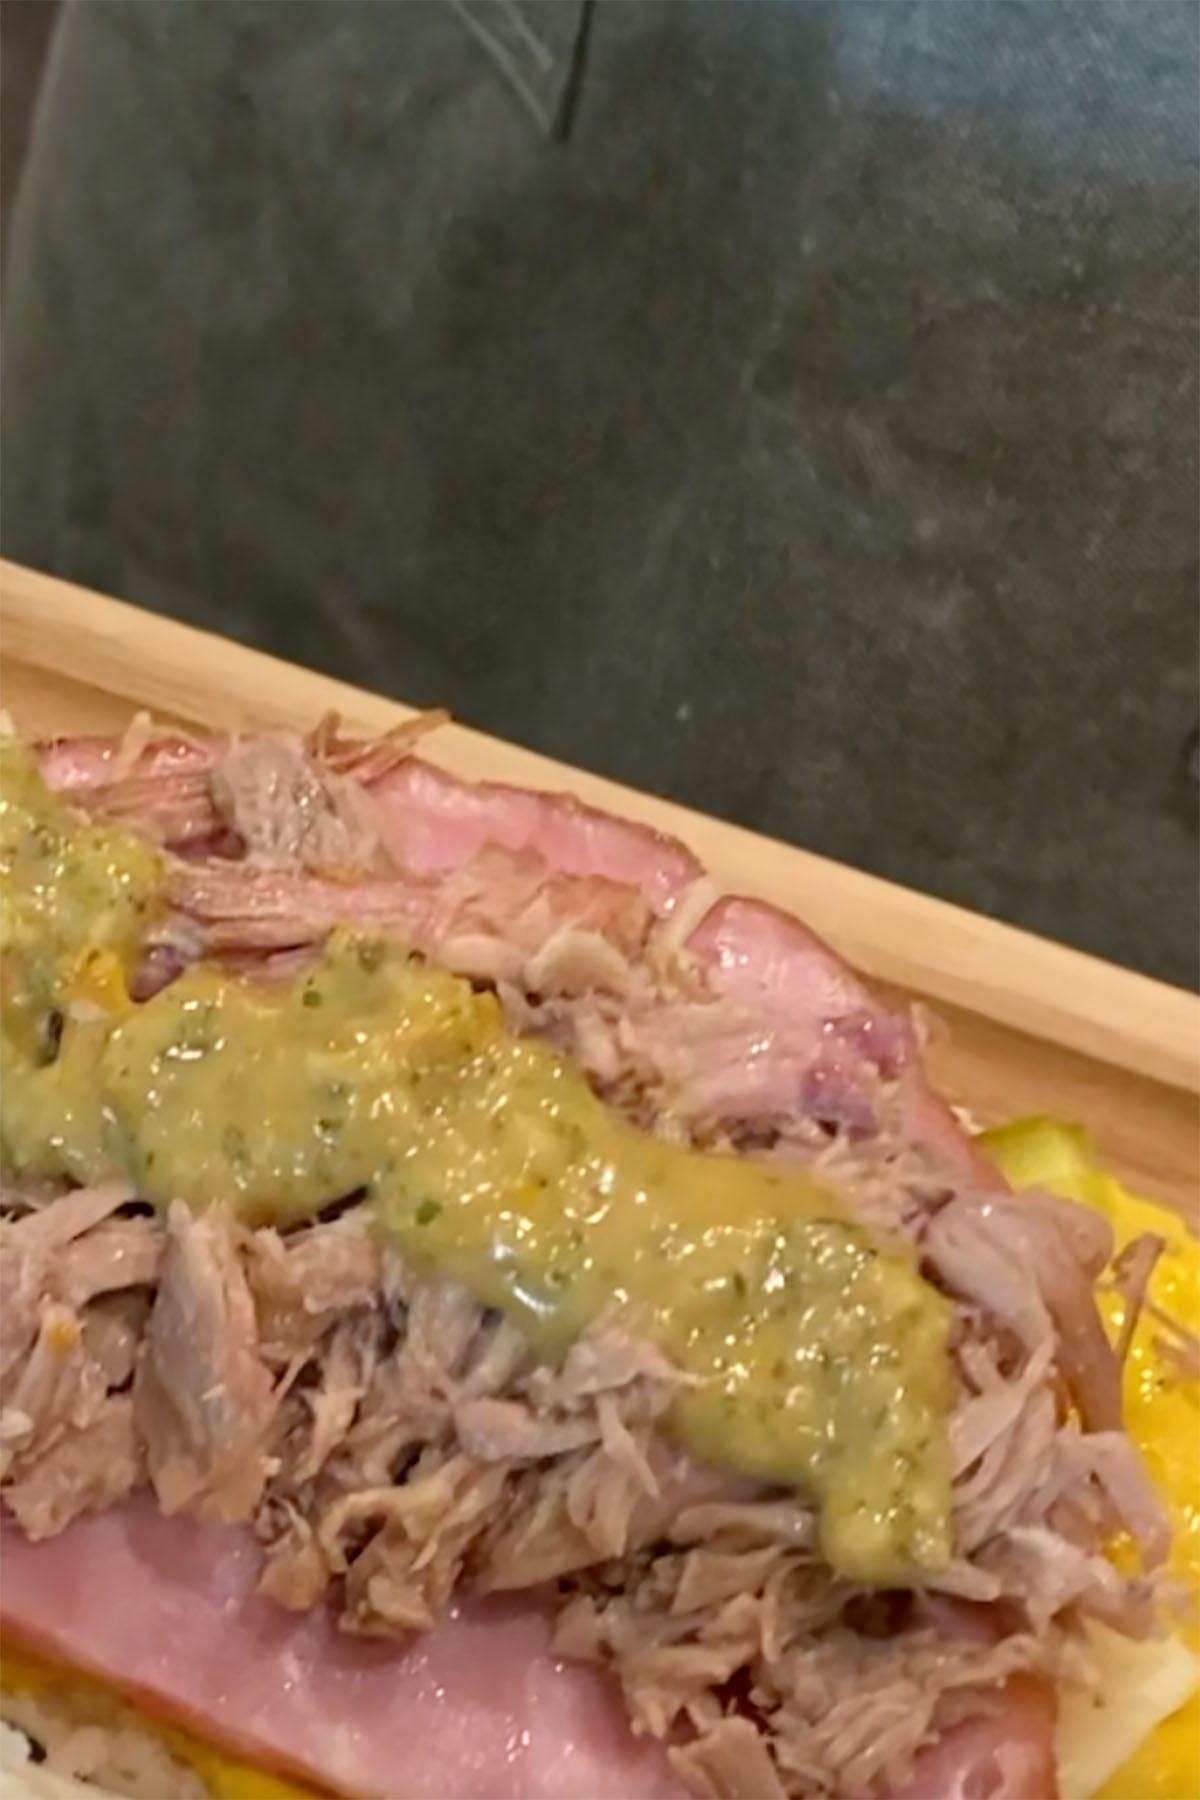 A sandwich with mustard, ham, cheese, pulled pork, and mojo sauce.